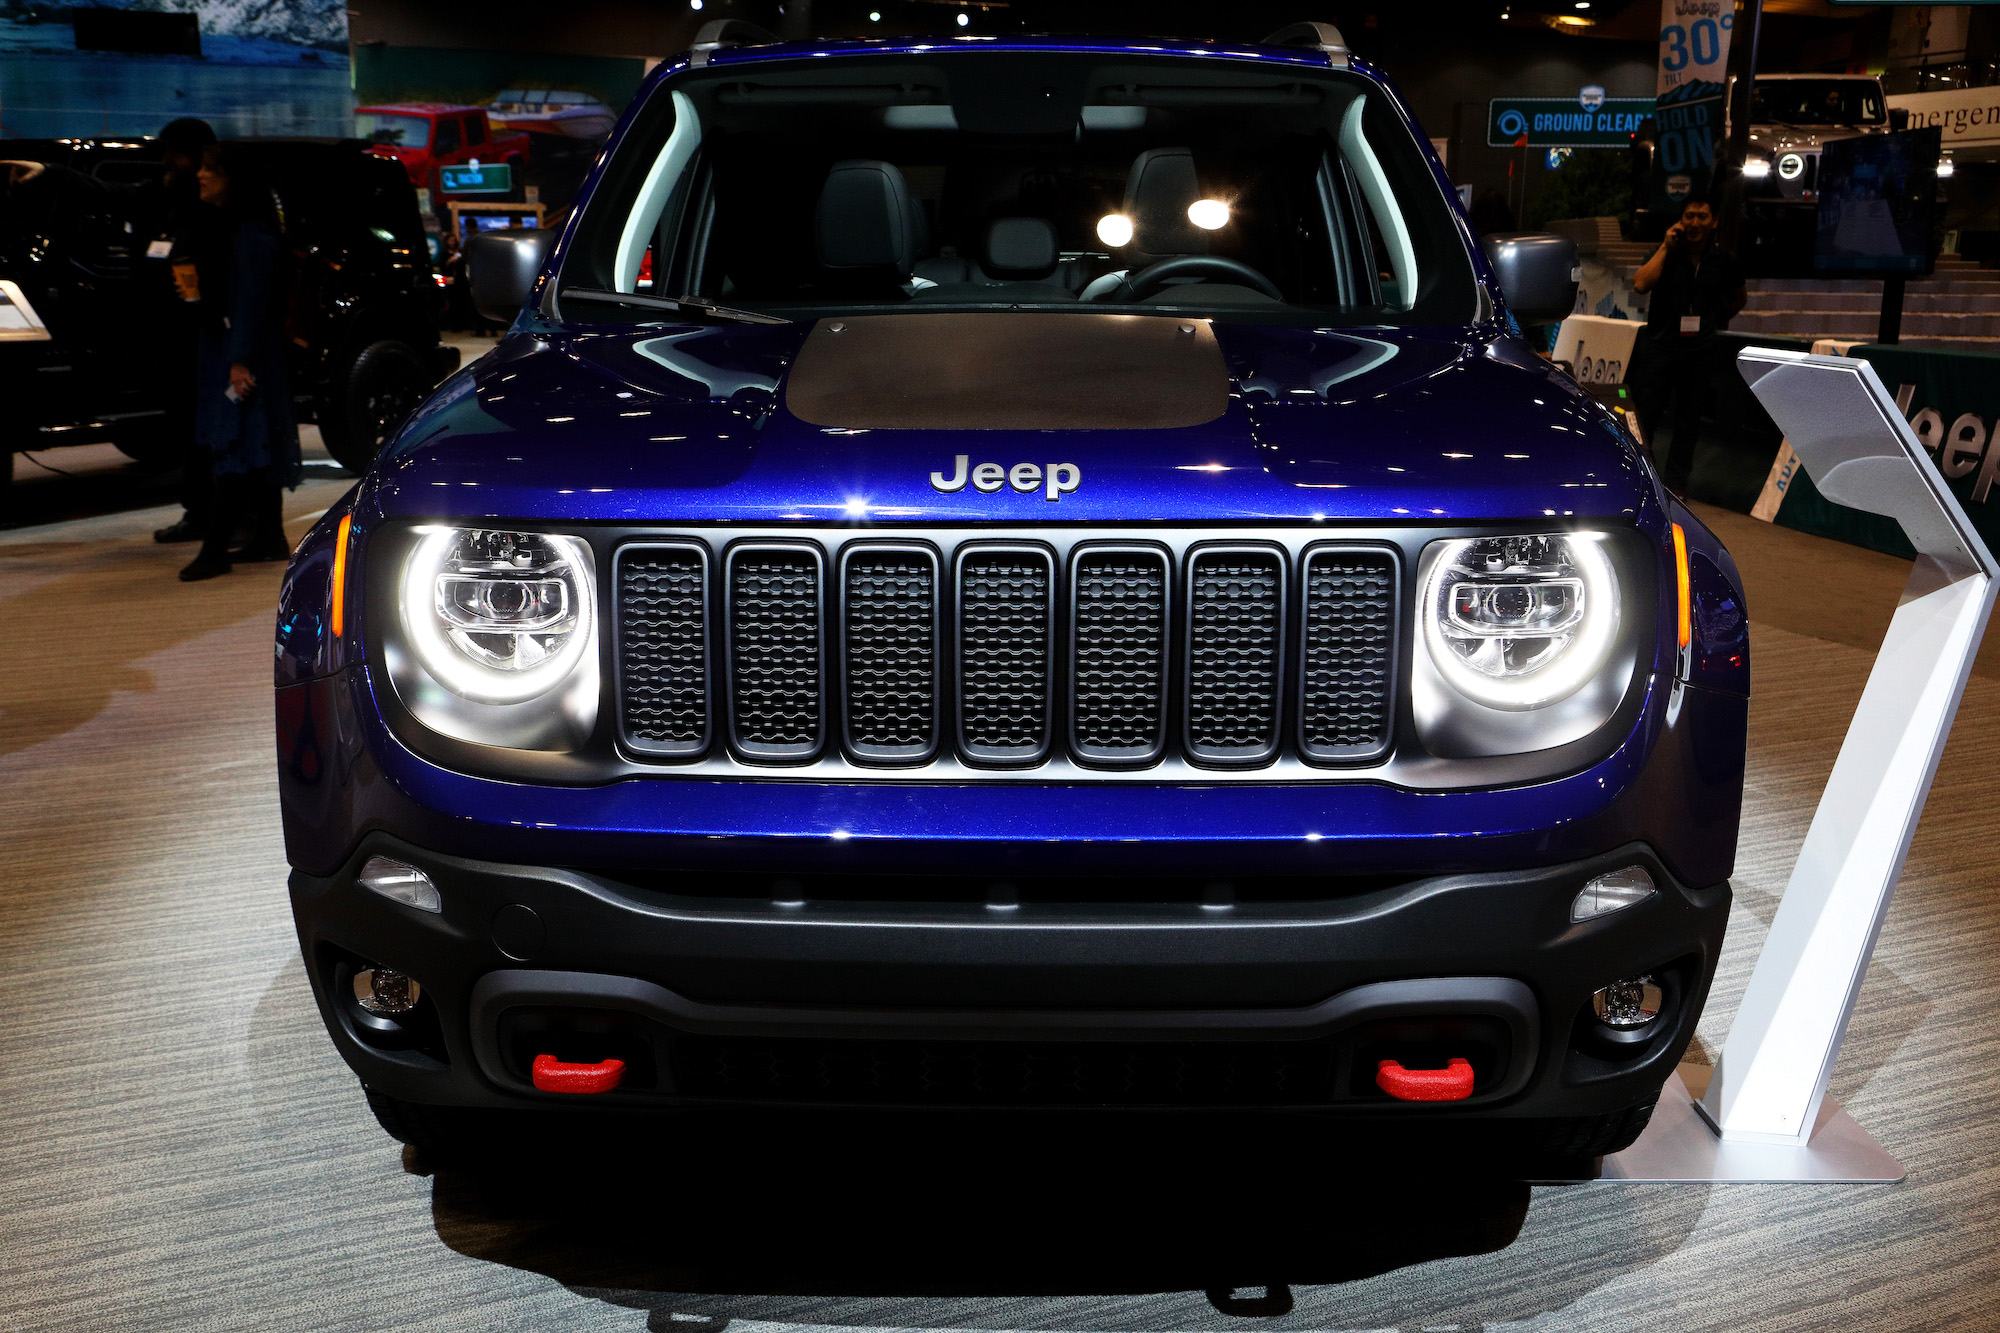 2020 Jeep Renegade is on display at the 112th Annual Chicago Auto Show at McCormick Place in Chicago, Illinois on February 7, 2020.